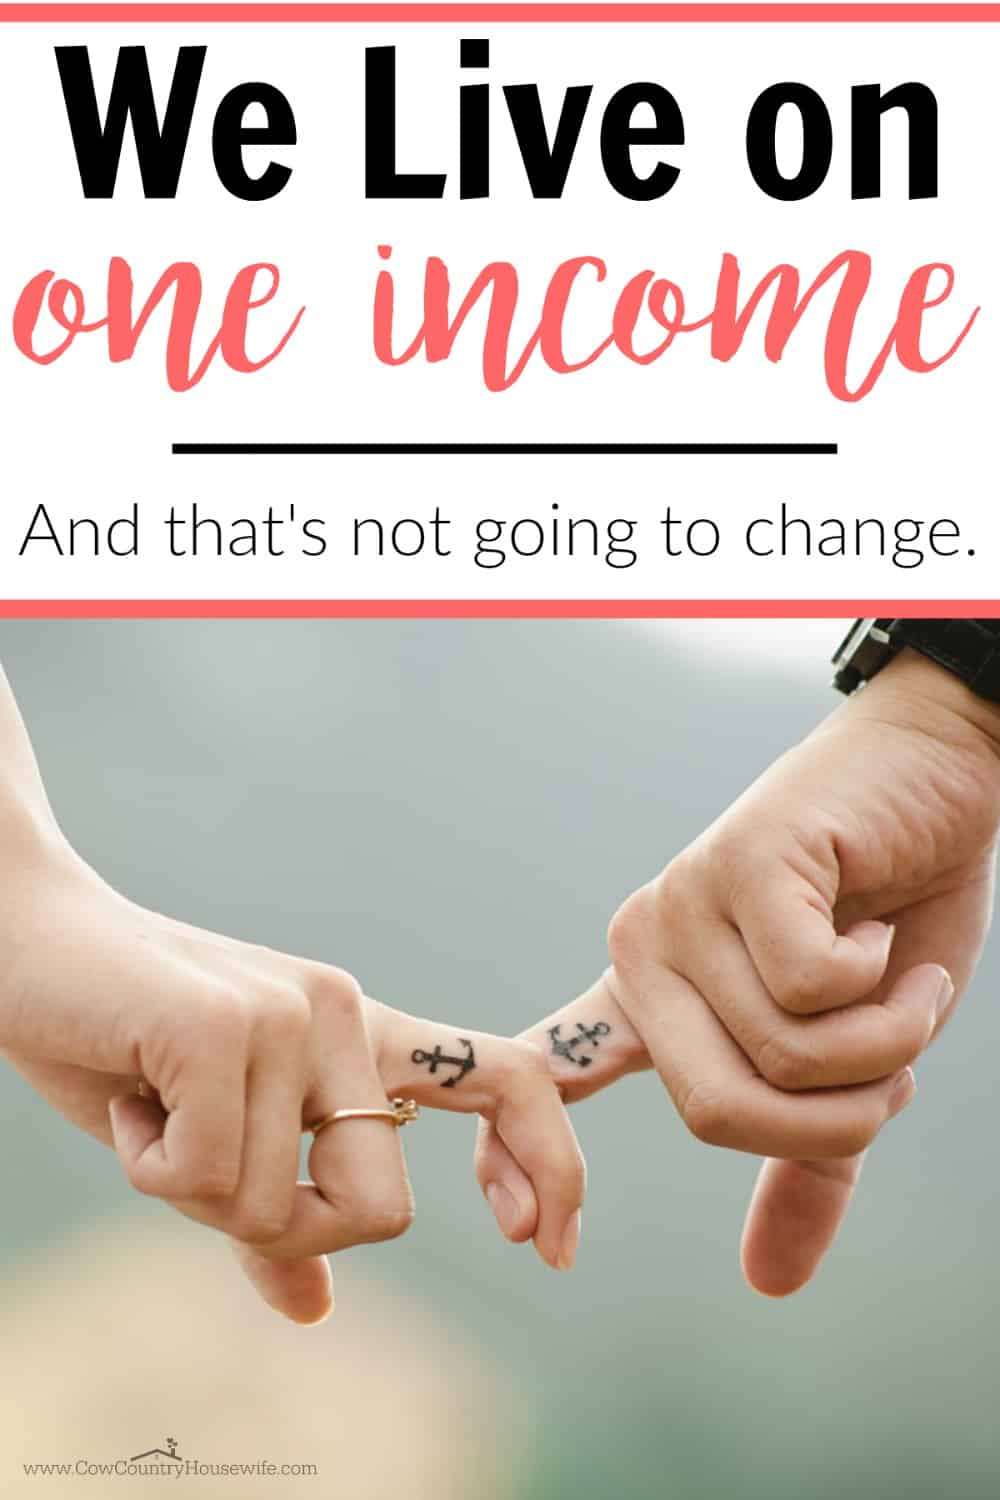 She lives on one low income with a family of 5! If she can do it, I can do it too! These are great! This is so inspirational! She shares how her family of 4 lived off of $17,000 each year! Easy ways to save more money. Learn how to save money. How to save on a low income. How to live on a ow income. How to live well on any income. How to live well on a low income. Personal finance tips for a low income. How can a family of four live well on $17,000/year? It's possible and no matter how much income you earn, you can learn a few things that will help you get control of your money. How We Lived Well on $17,000 as a Family of Four. how to live on one income and save money. How to live on one income tips. How to live on one income without debt. How to live on one income and stay out of debt. How to live on one income budget. How to live on one income families. Living on one income tips. Living on one income and save money. Living on one income Dave Ramsey. One income family. One income budget. One income living. One income family budget. One income family budget tips.